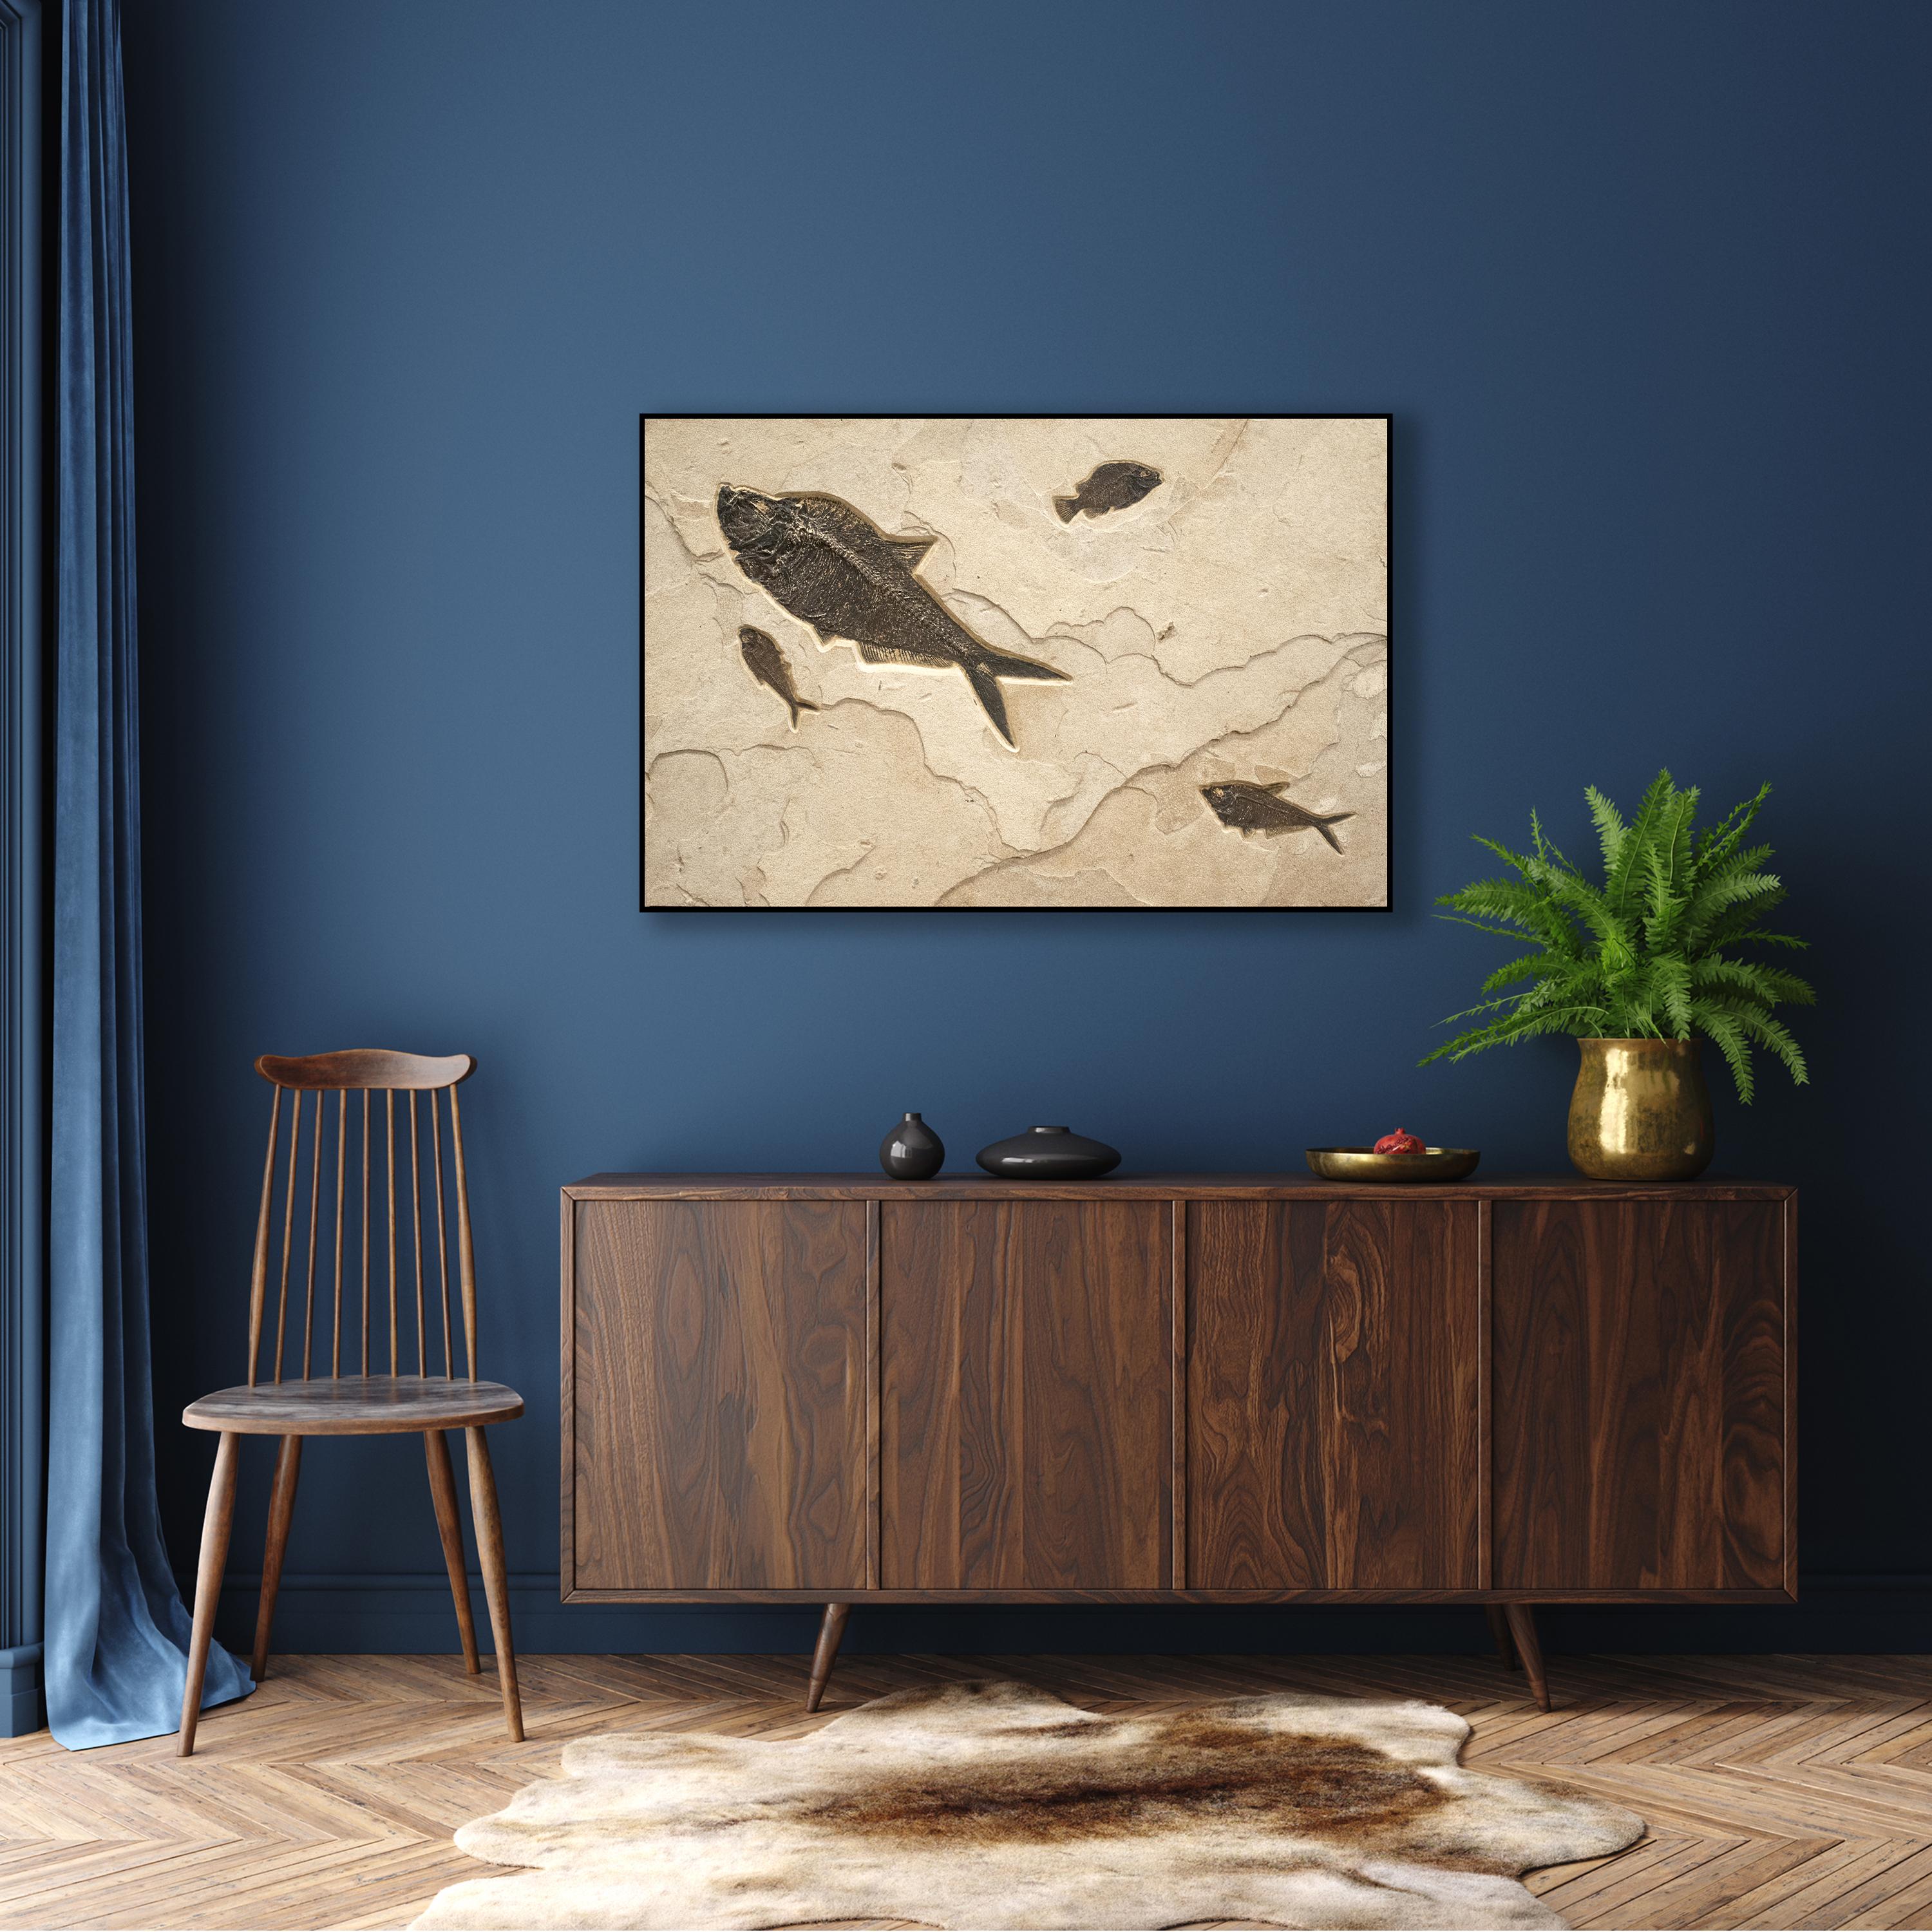 This exquisite fossil mural features three Diplomystus dentatus and a Cockerellites liops (formerly known as Priscacara). These fish are all Eocene era fossils dating back about 50 million years. These ancient fish are forever preserved in a